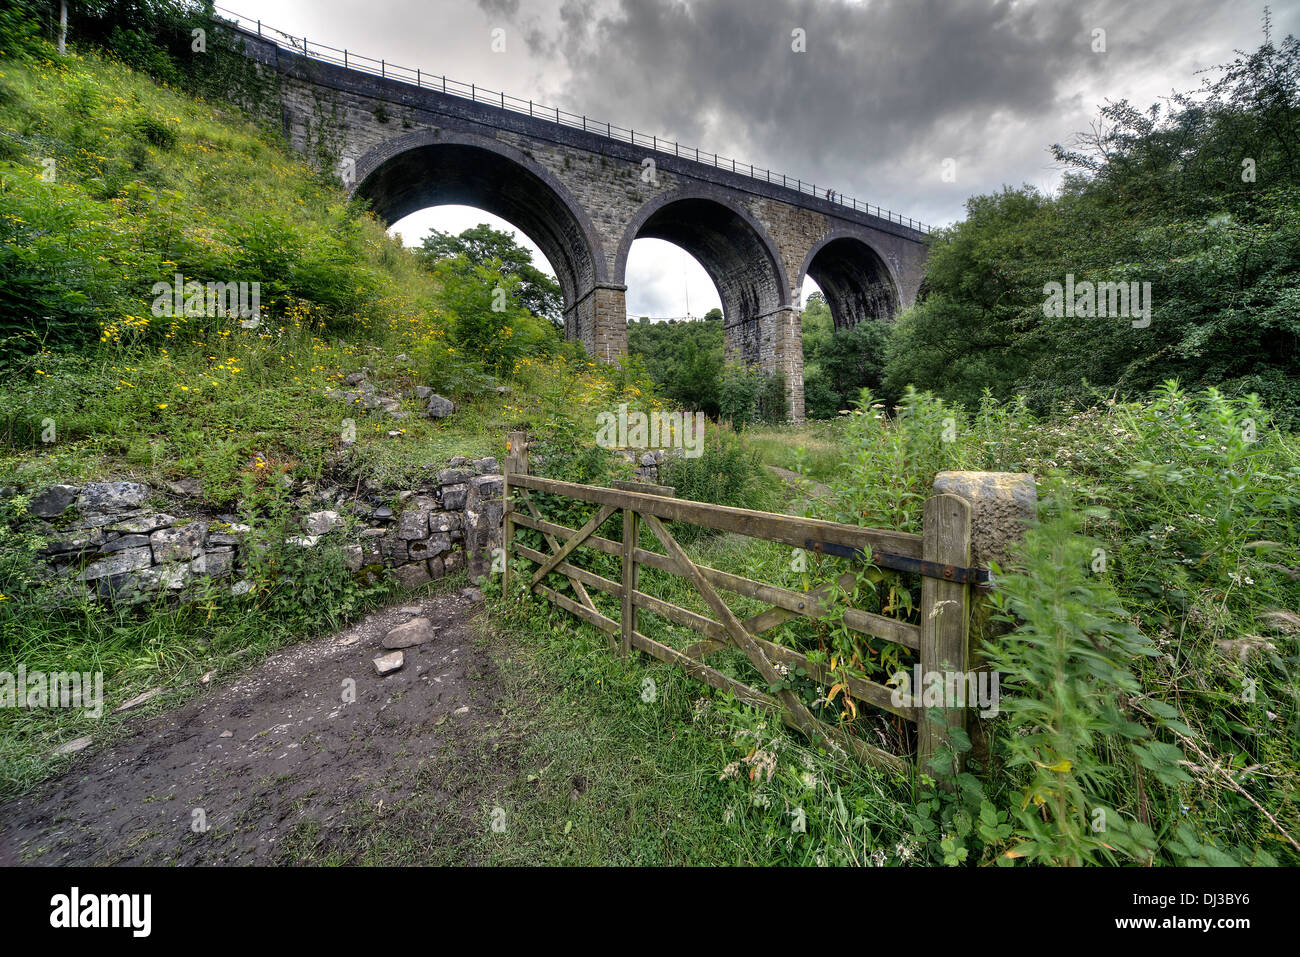 The Headstone viaduct often referred to as the Monsal Dale Viaduct, built by the Midland Railway over the river Wye. Stock Photo